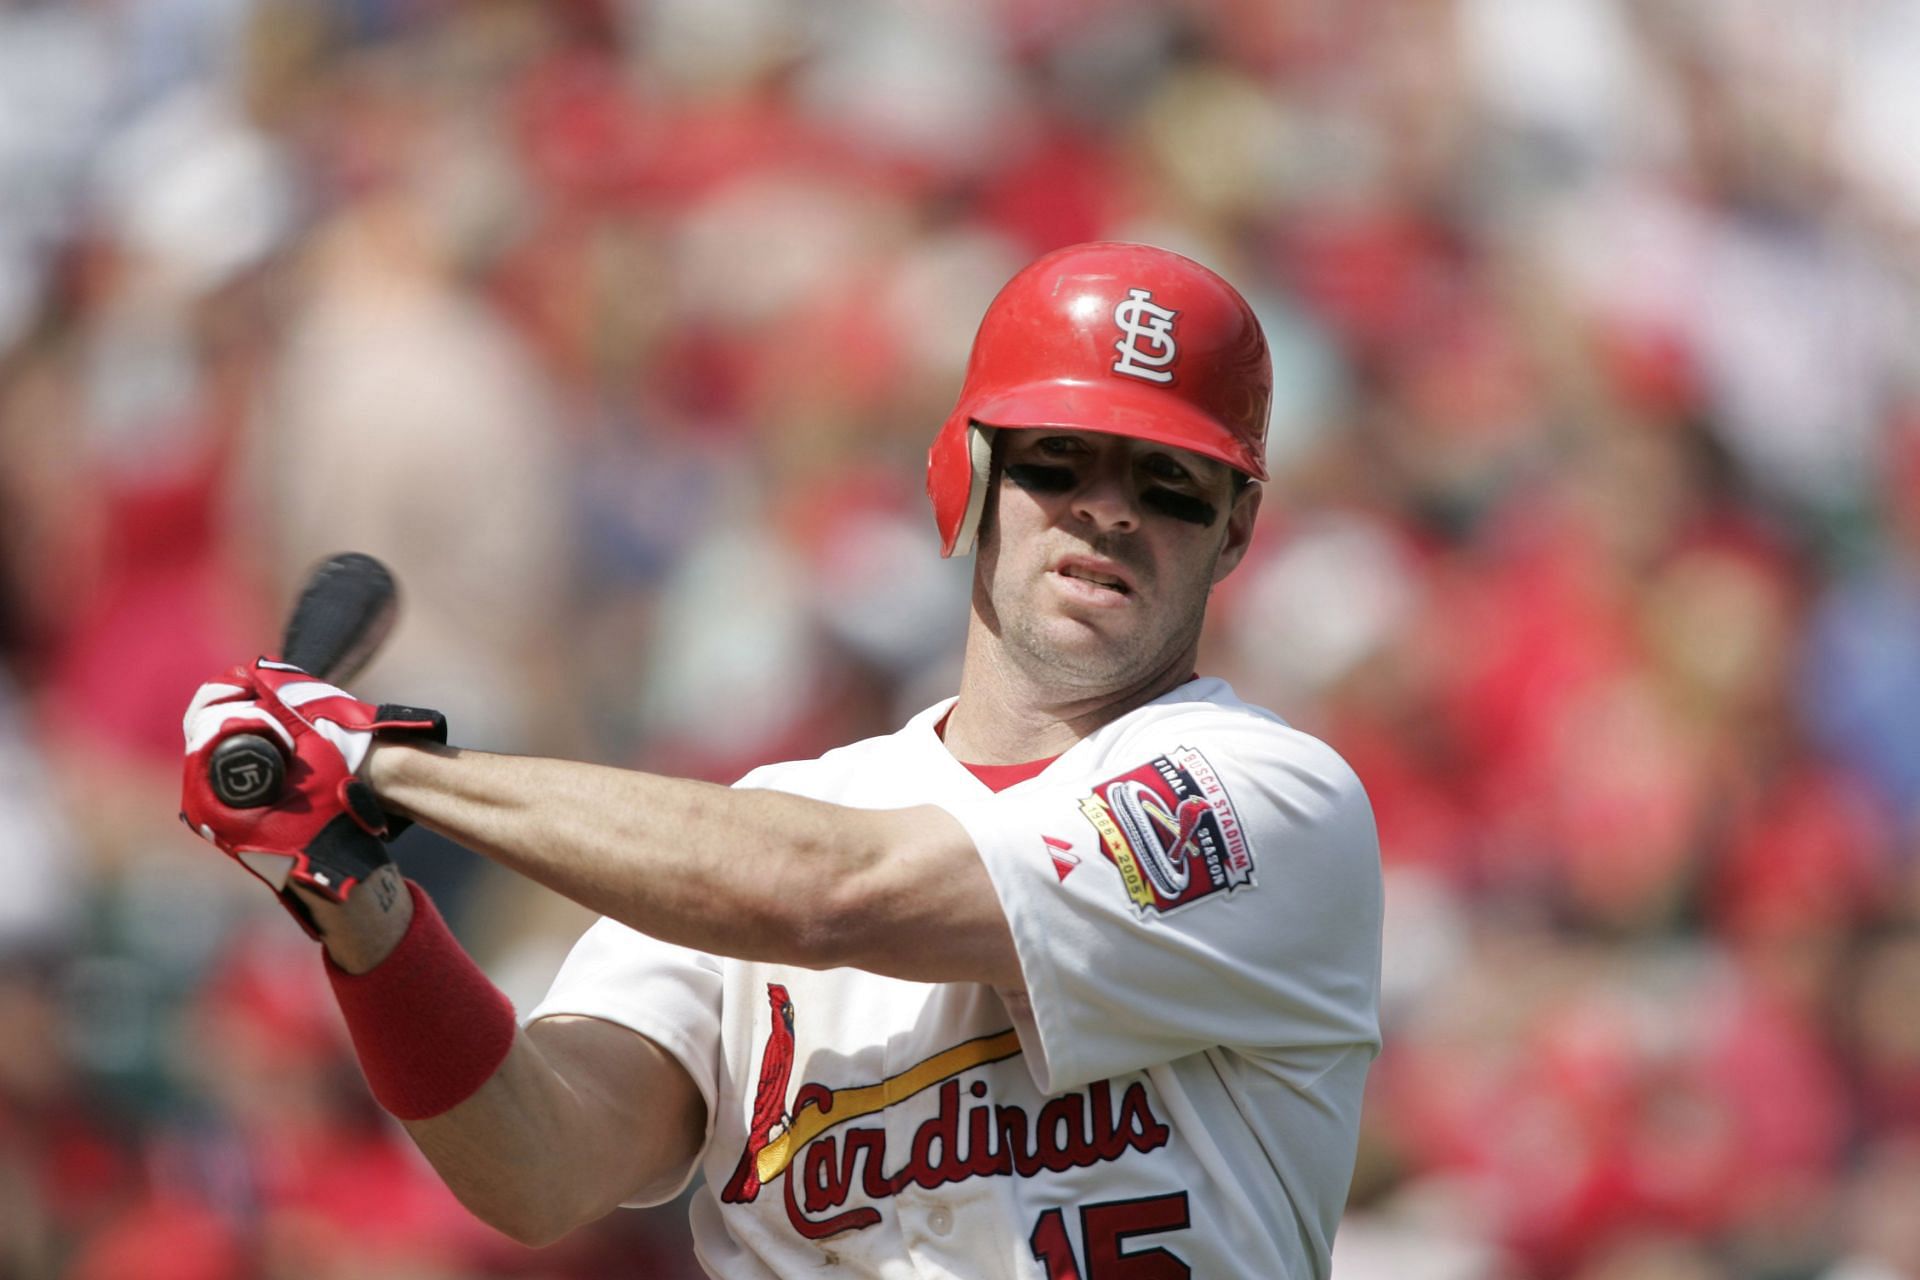 Jim Edmonds was selected to the All-Star team in 1995, 2000, 2003, 2005